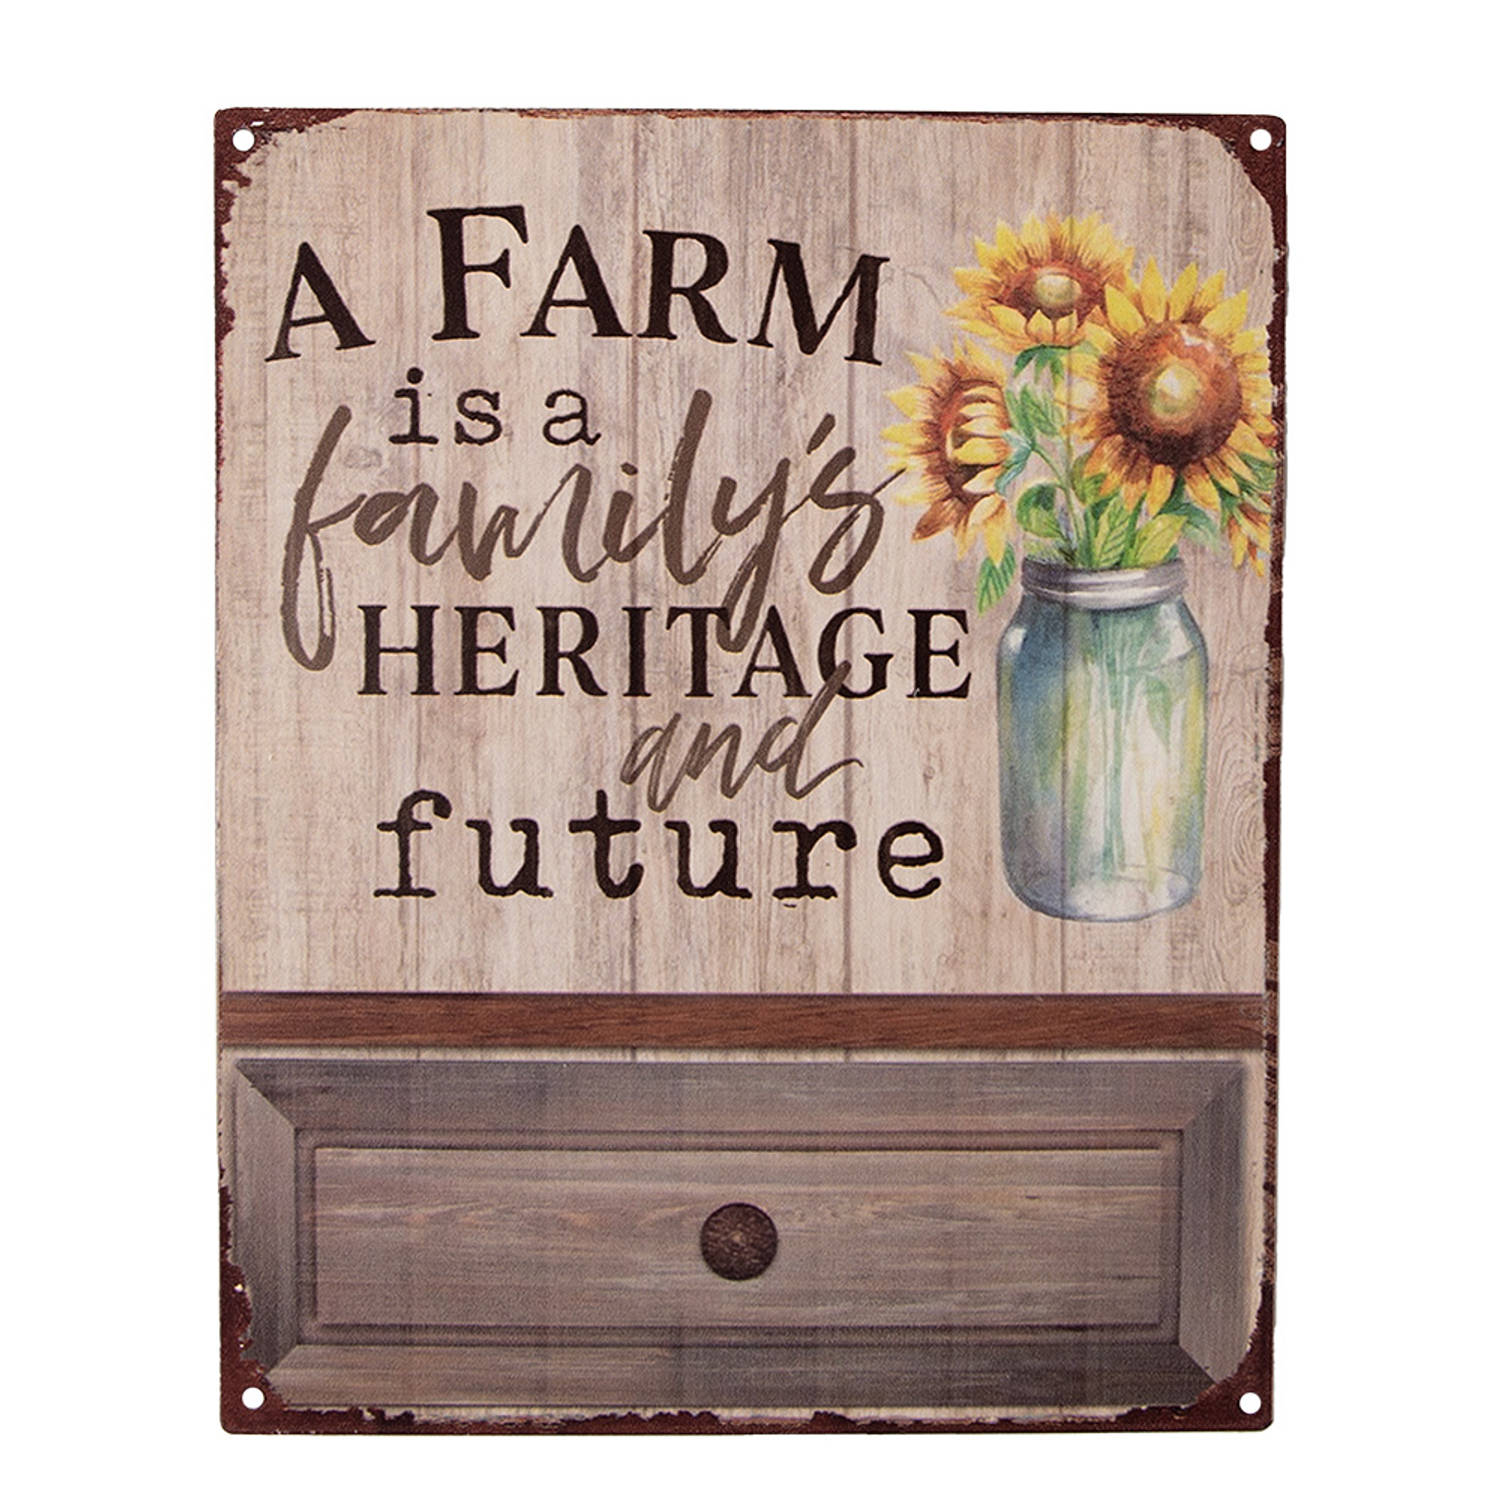 Clayre & Eef Tekstbord 20x25 Cm Bruin Ijzer Bloemen A Farm Is A Family's Heritage And Future Wa